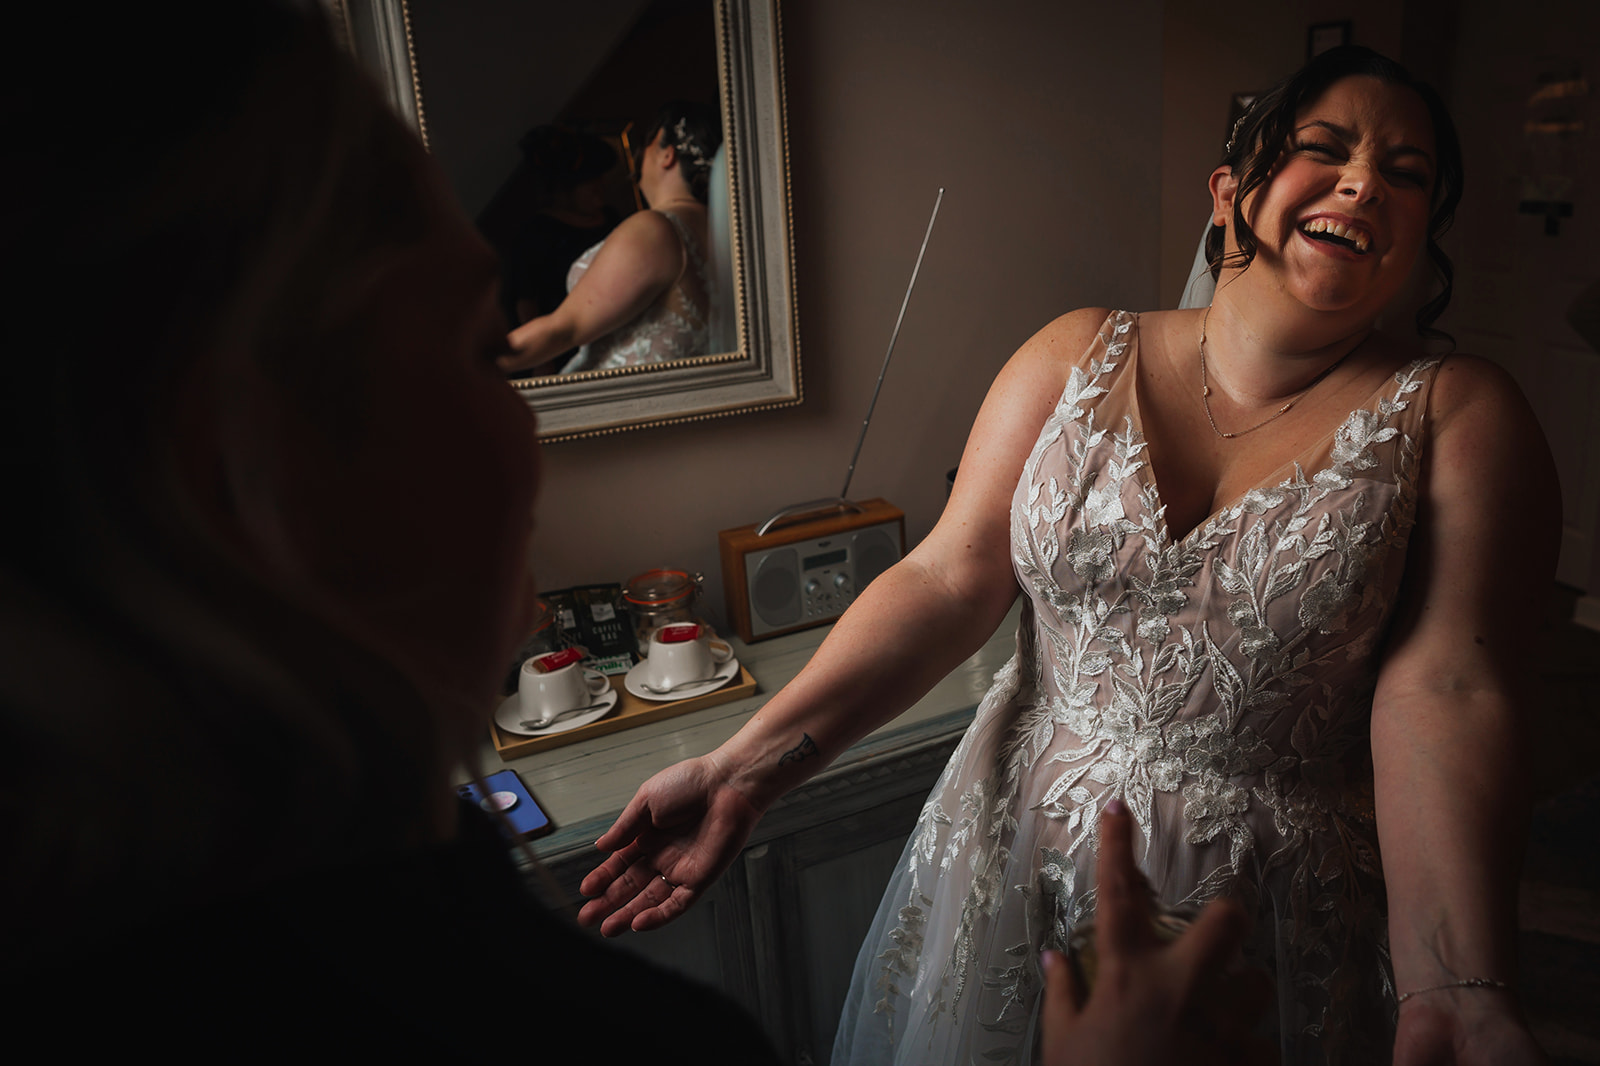 The bride laughs as her make-up artist sprays perfume on her wrists